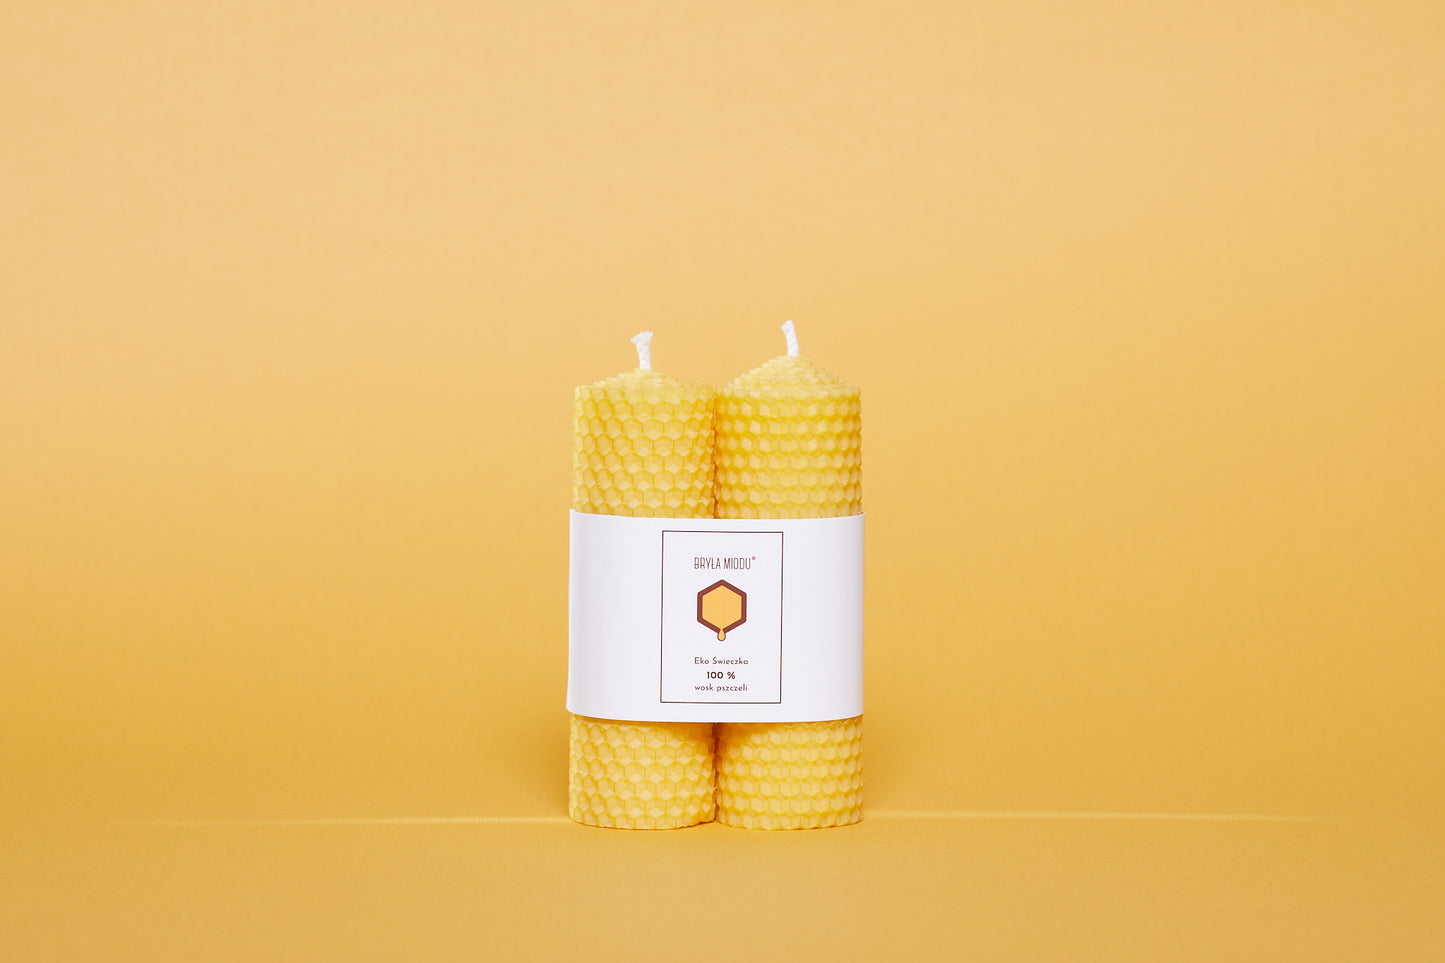 Eco candles made of beeswax - 2 pcs.